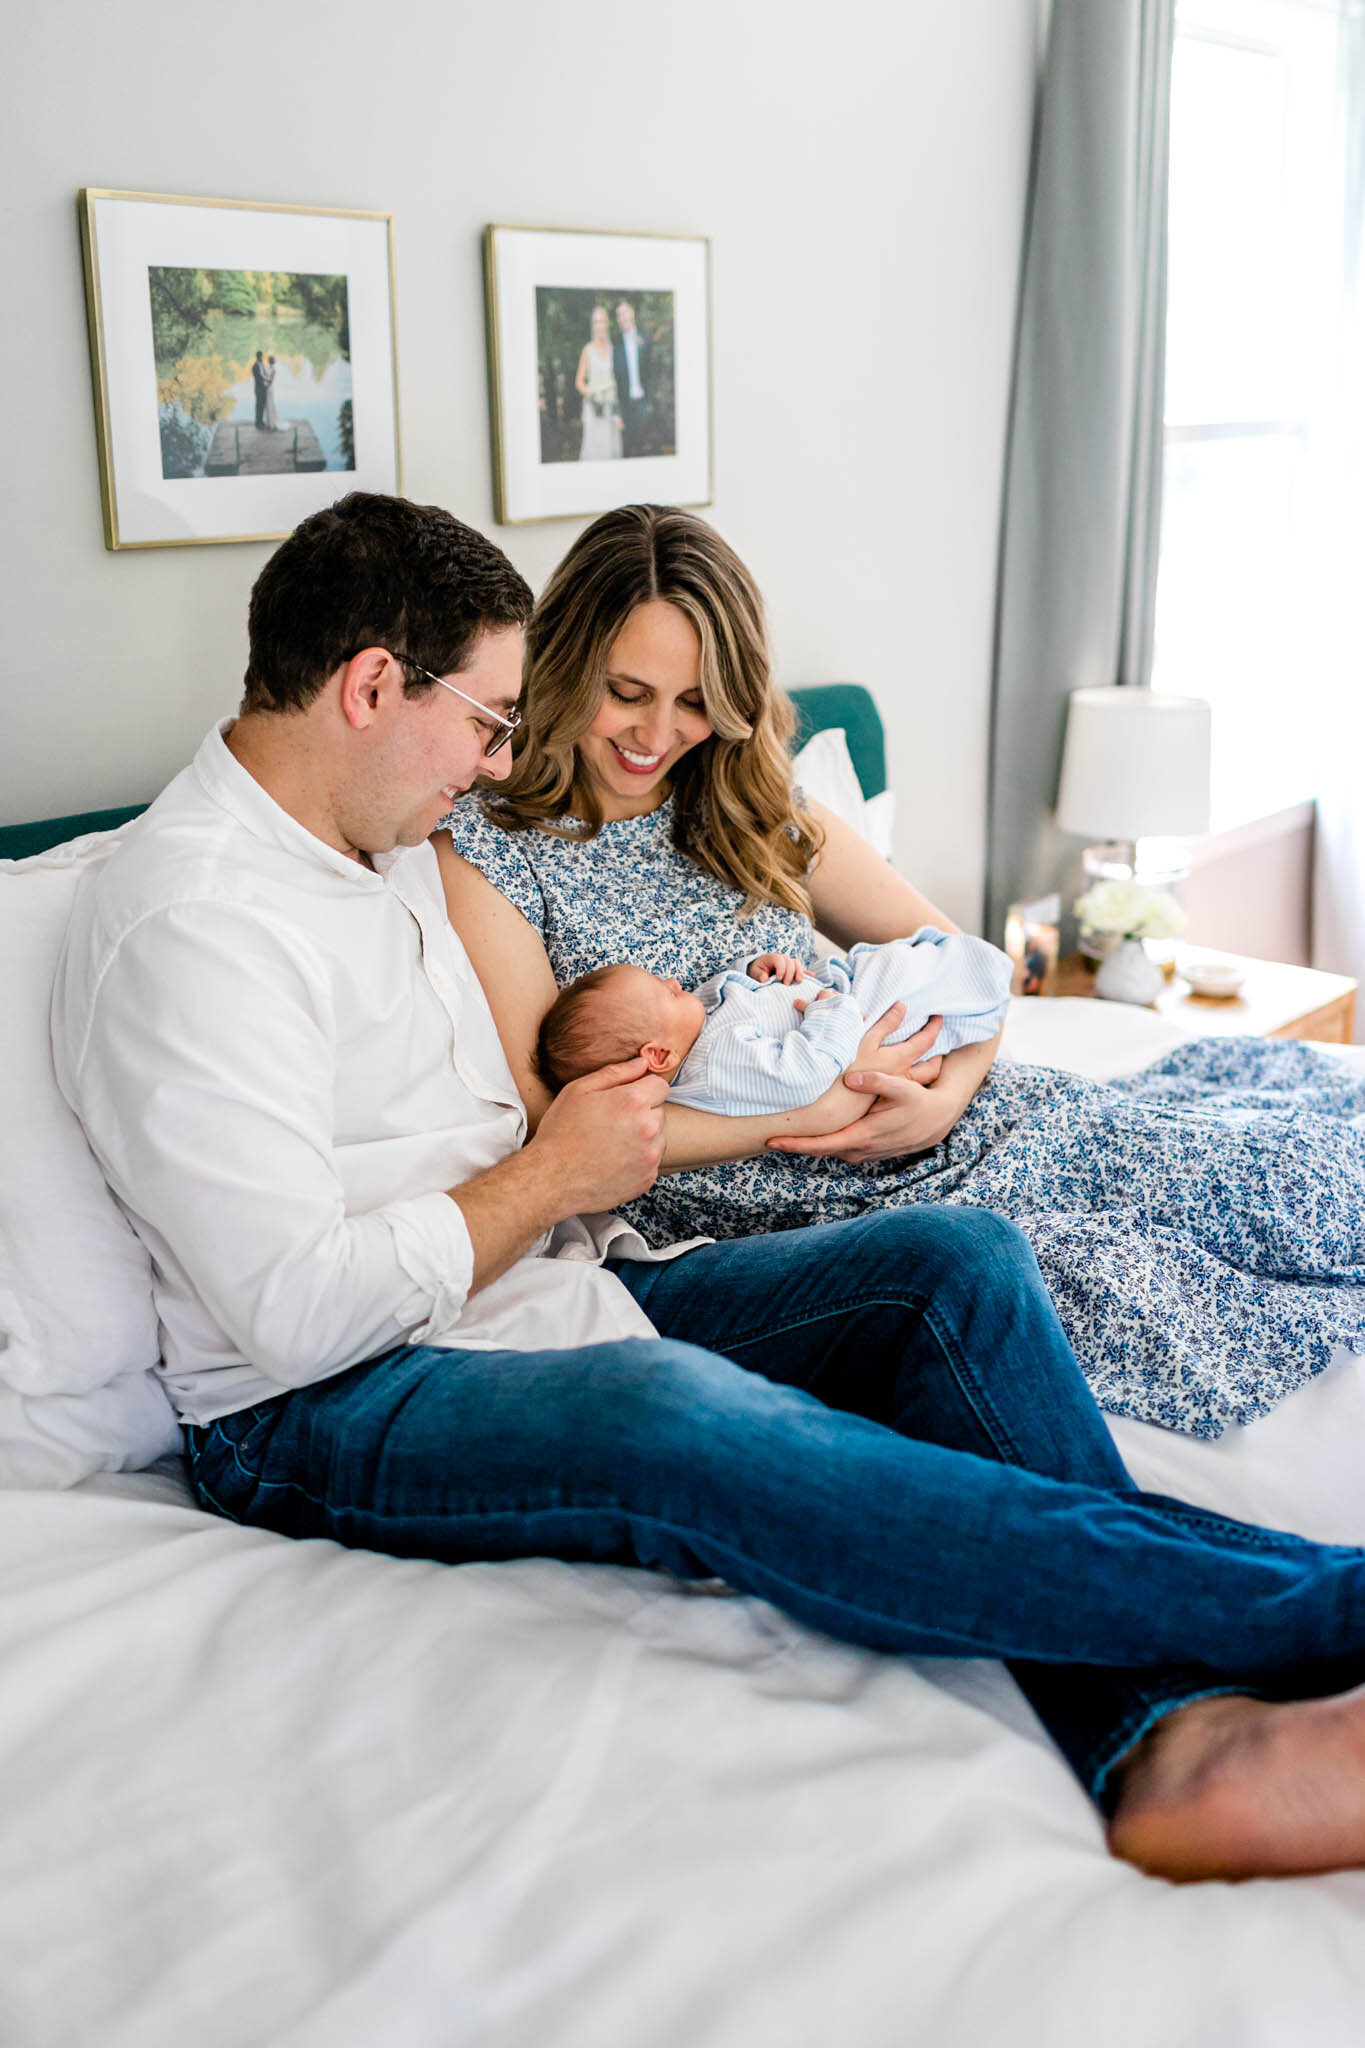 Couple sitting on bed with newborn baby | Greensboro Newborn Photographer | By G. Lin Photography